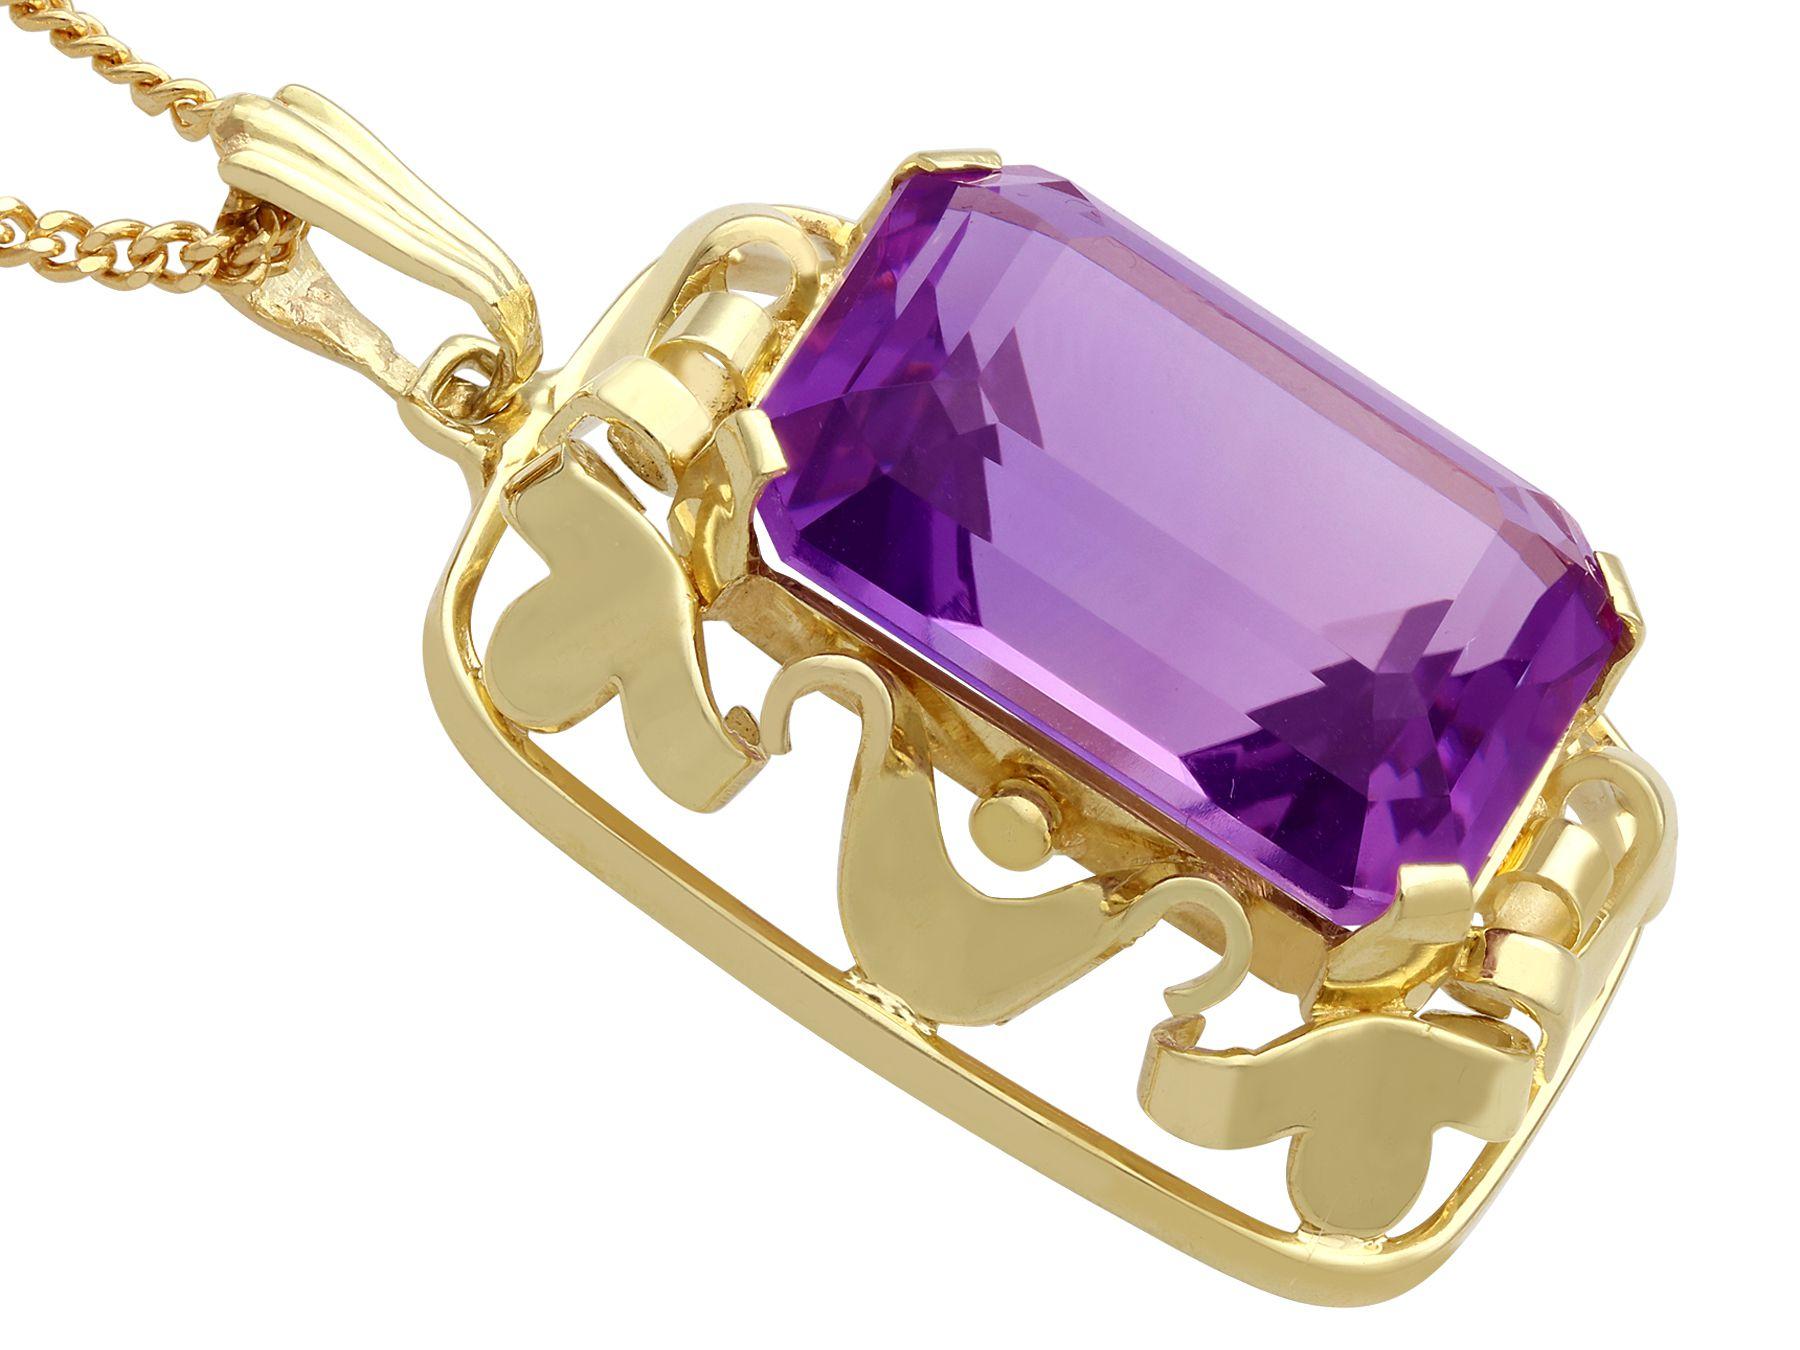 Emerald Cut Vintage 1950s 15.41 Carat Amethyst and Yellow Gold Pendant For Sale